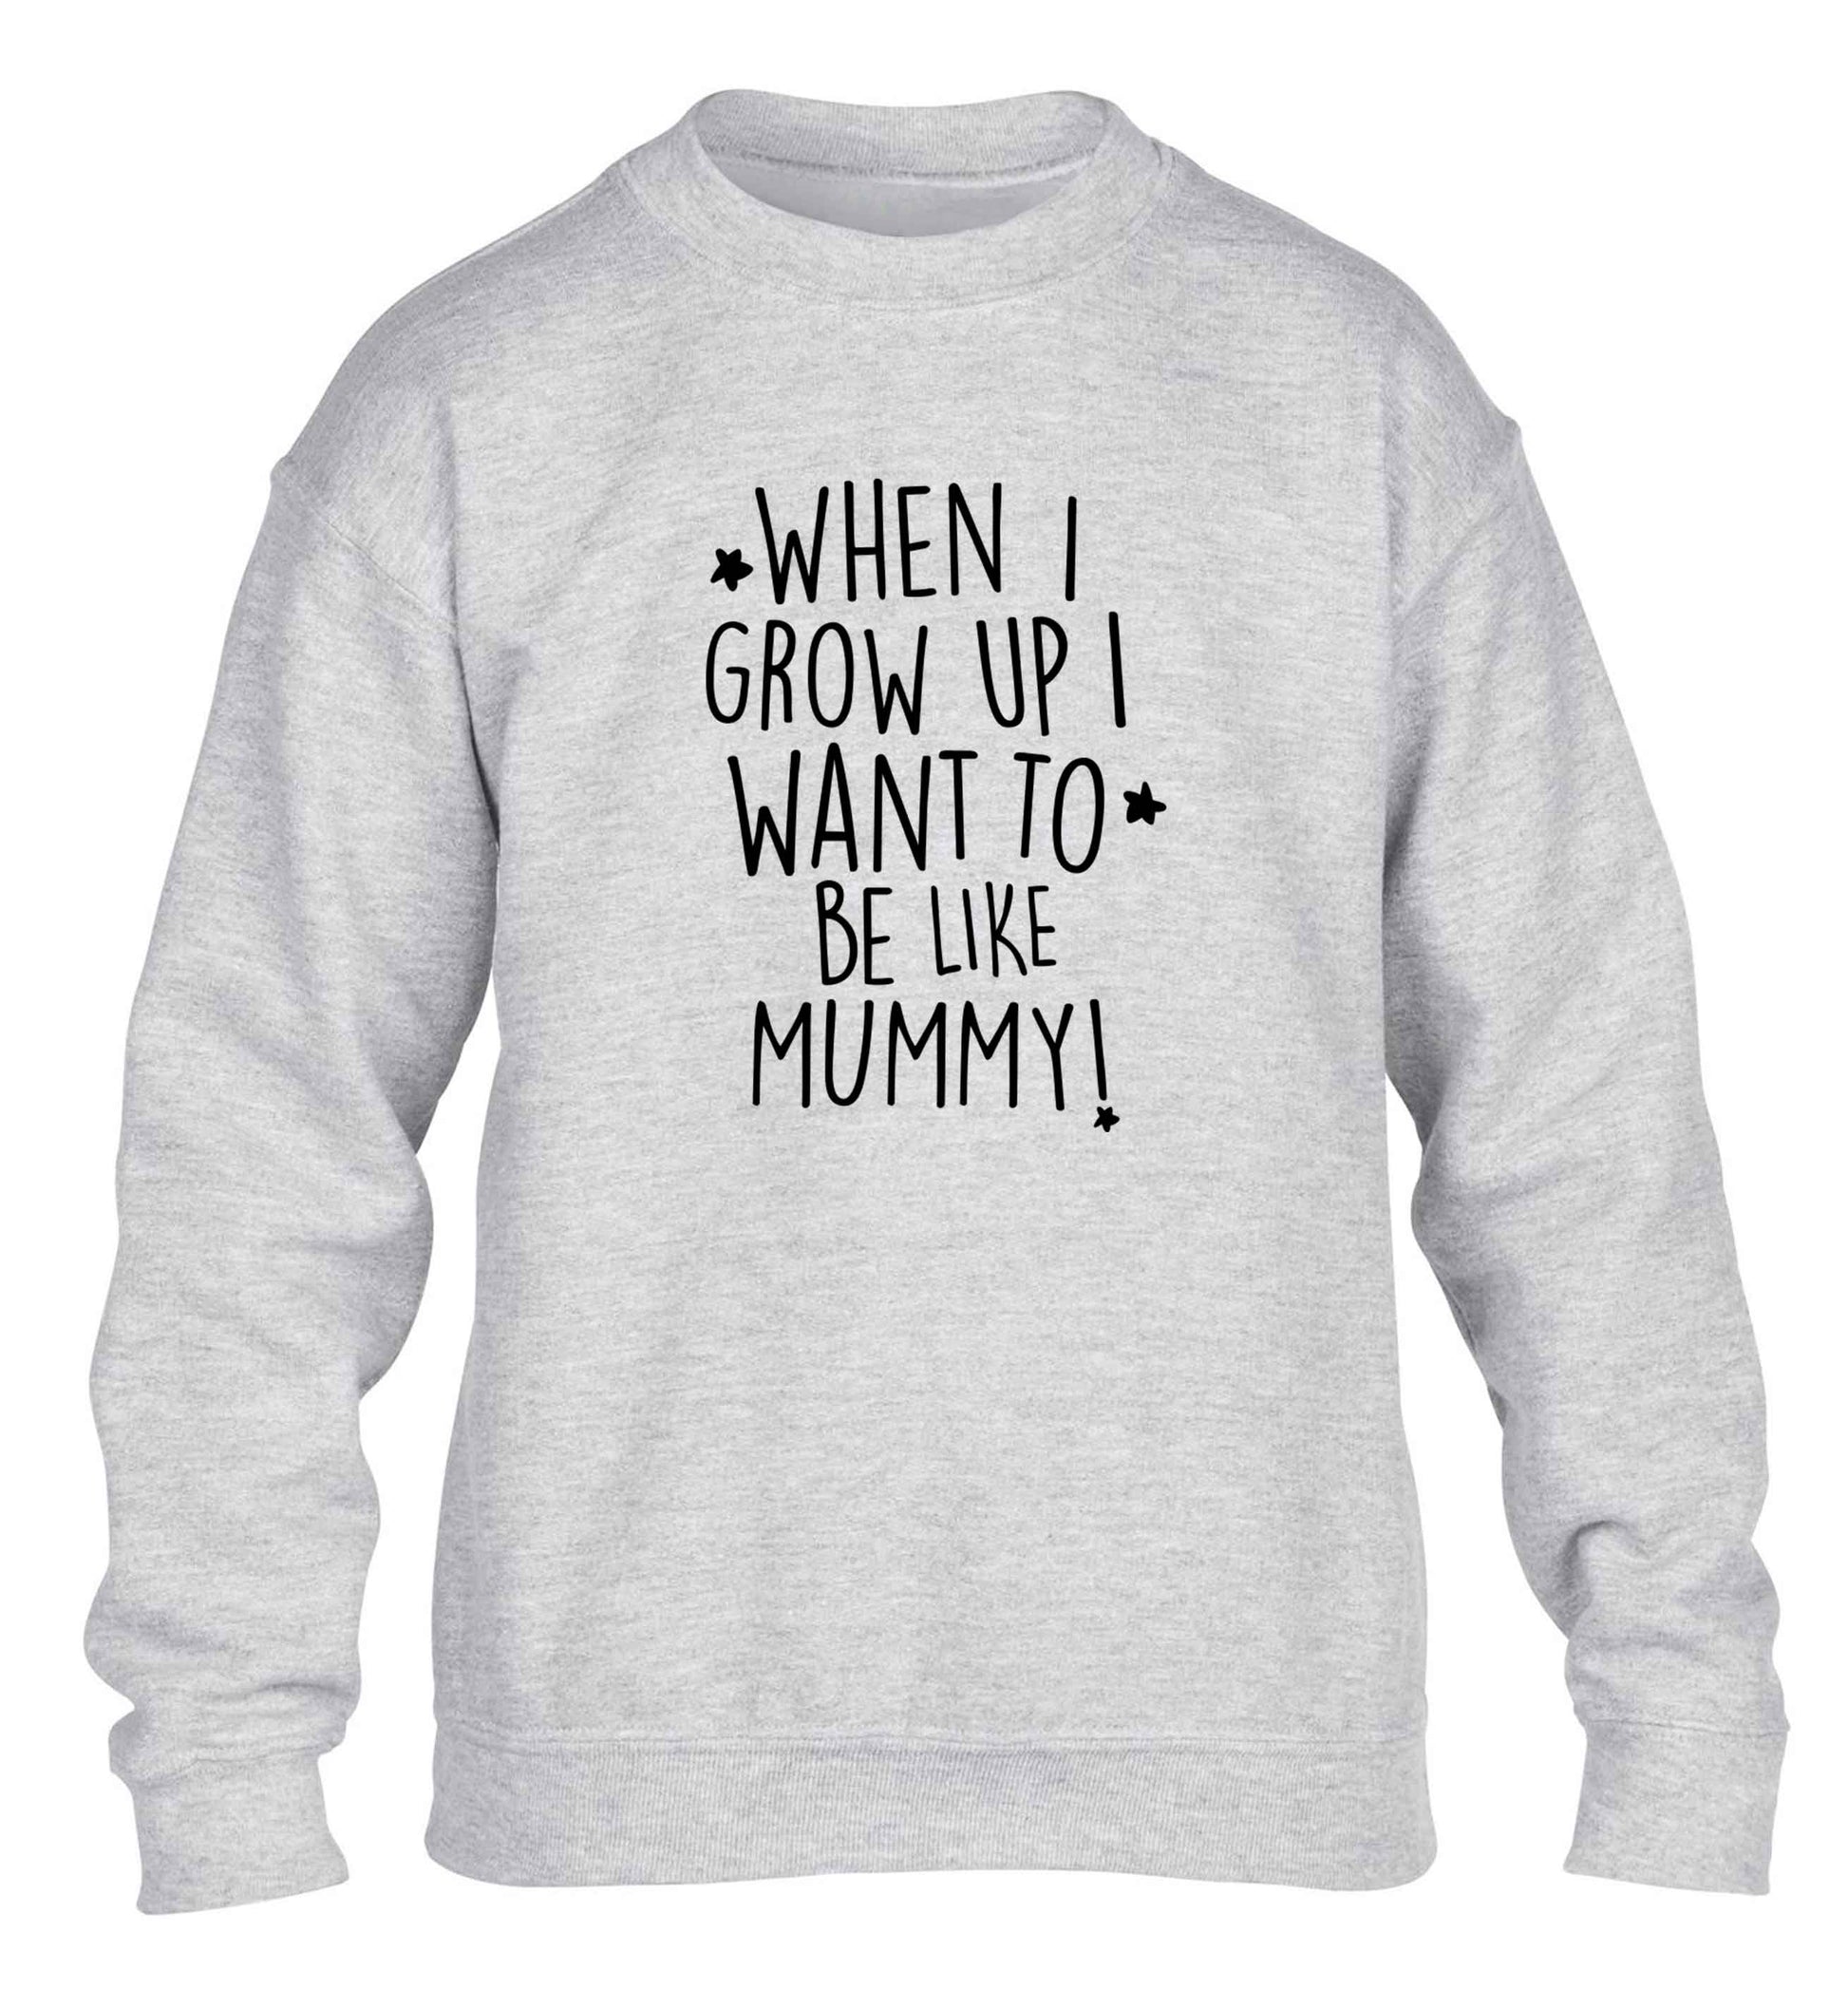 When I grow up I want to be like my mummy children's grey sweater 12-13 Years